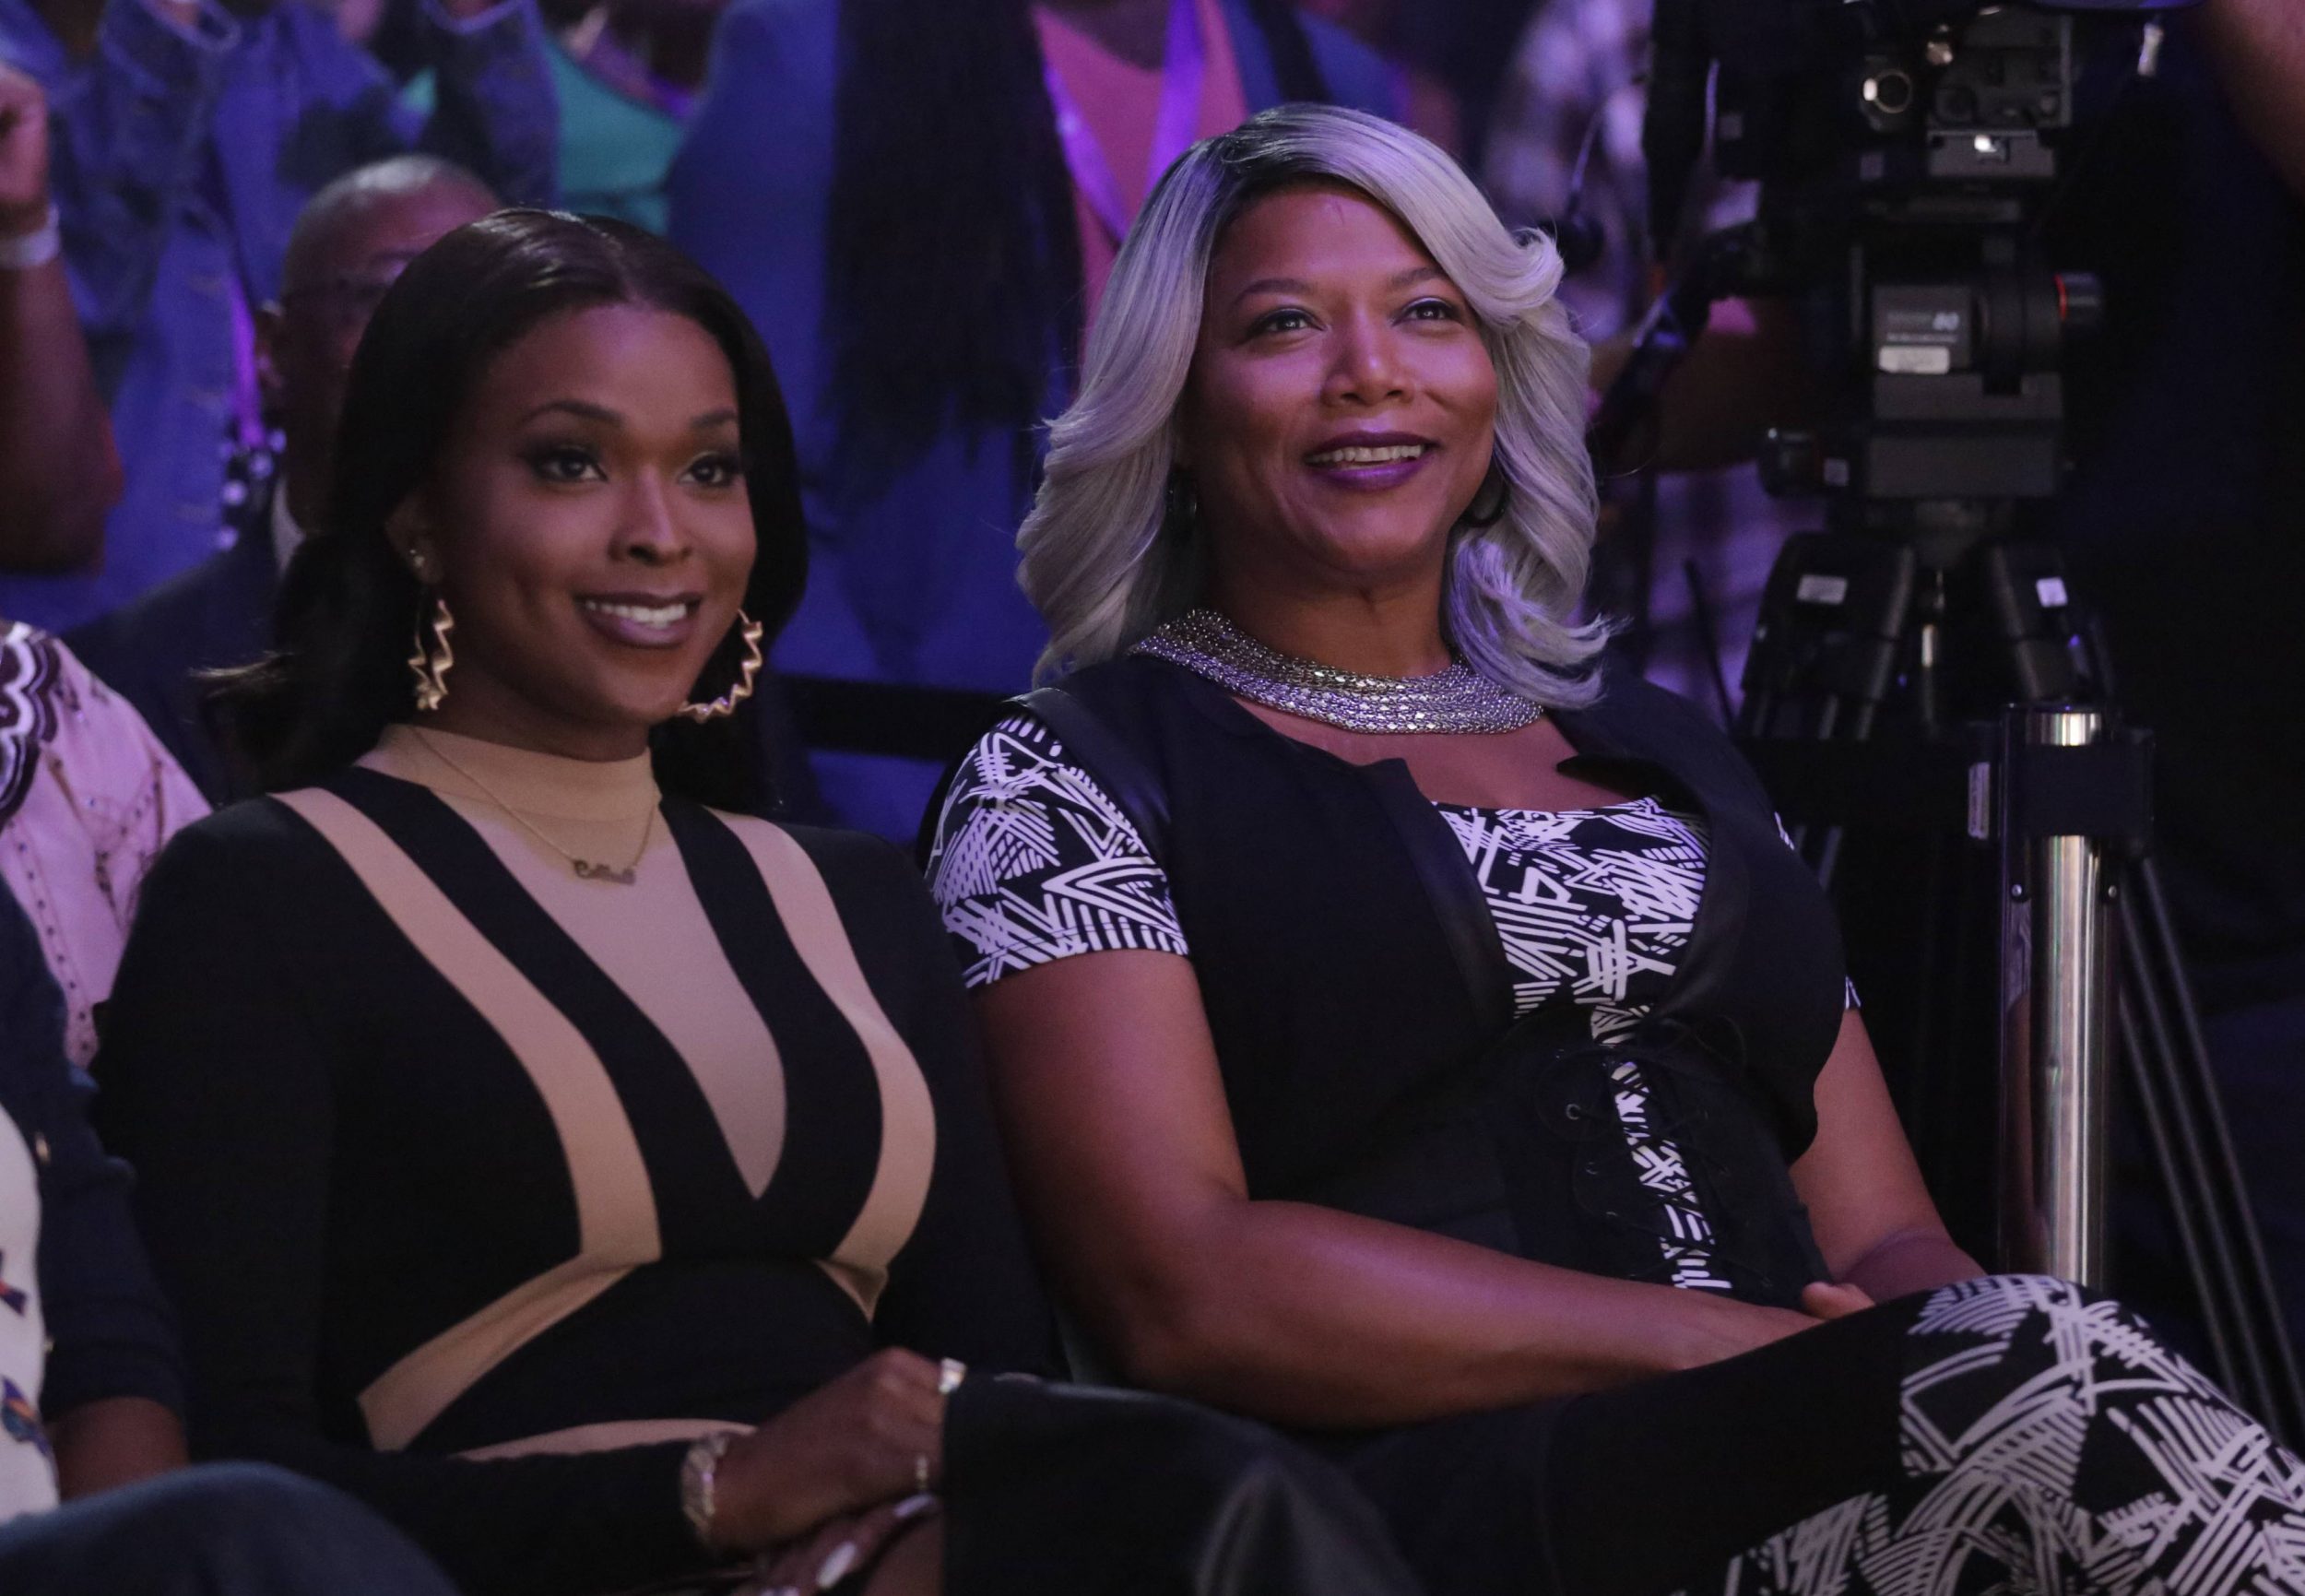 STAR: Pictured L-R: Amiyah Scott and Queen Latifah in the "Code of Silence" episode of STAR airing Wednesday, Jan. 18 (9:00-10:00 PM ET/PT) on FOX. ©2016 Fox Broadcasting Co. CR: Carin Baer/FOX